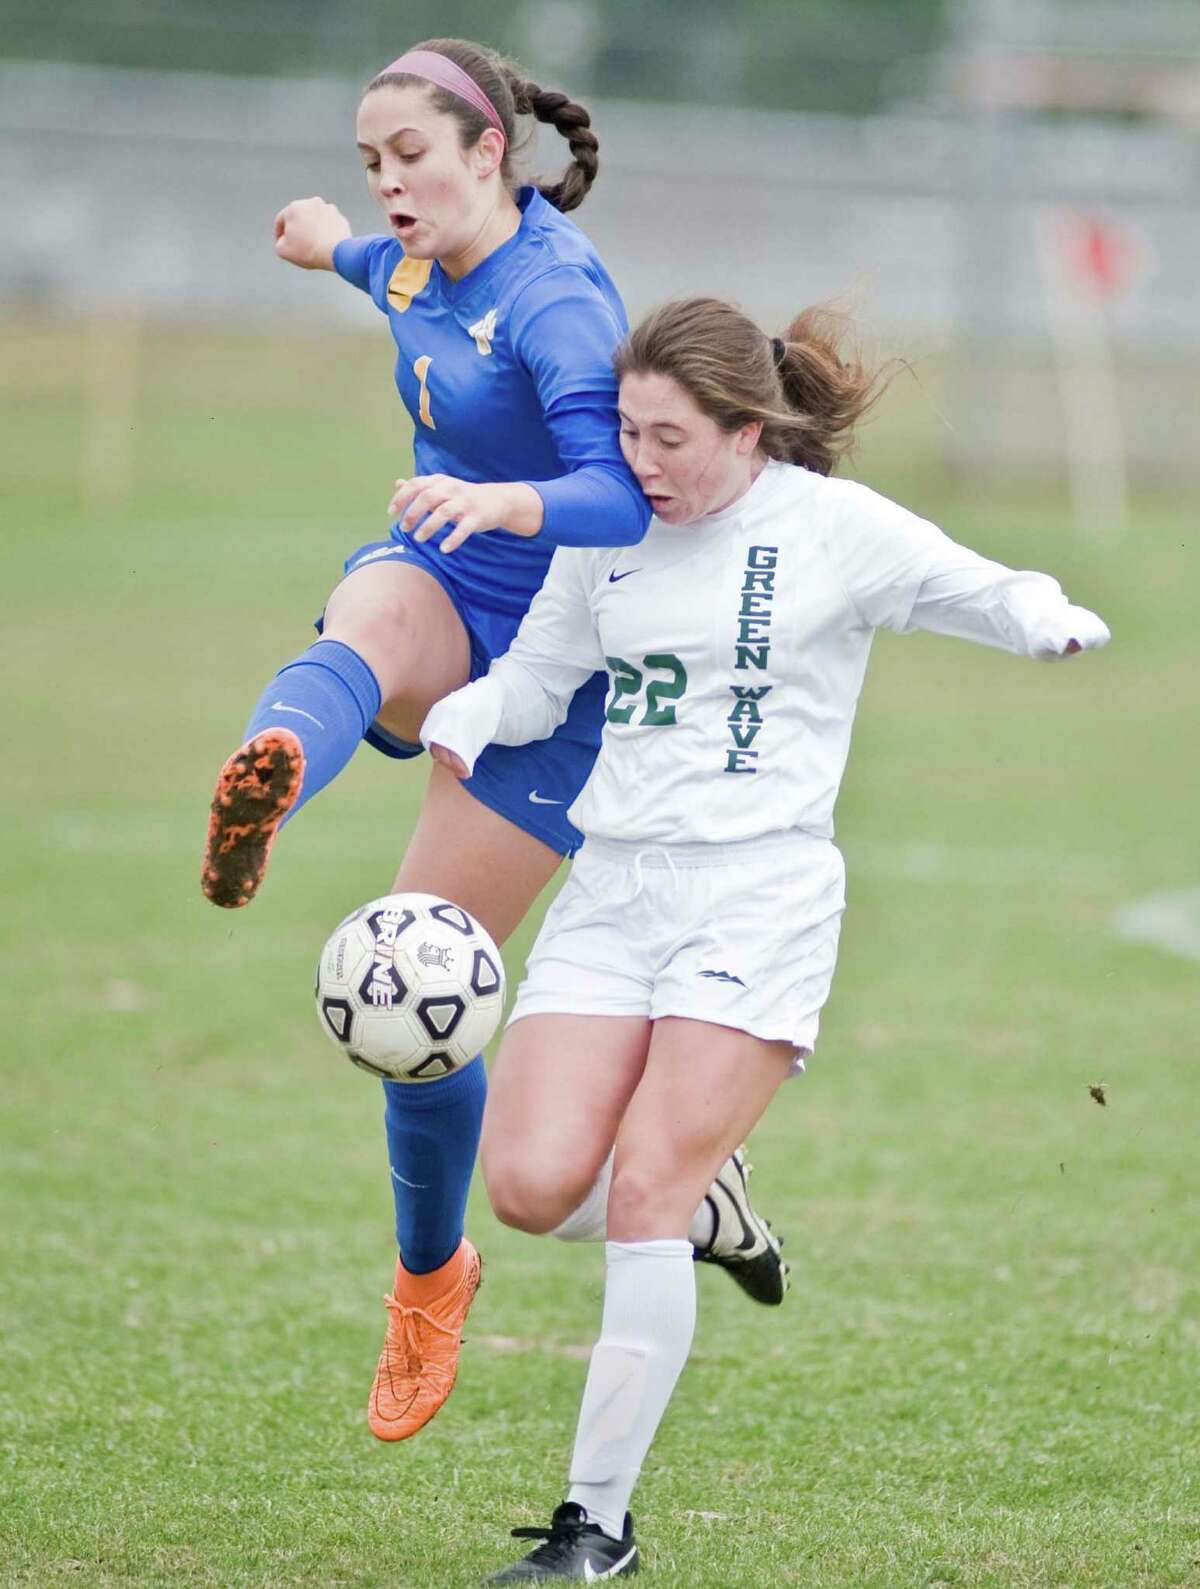 Mercy High School's Camille Gilarde and New Milford High School's Kelly Marsan come together in the Class LL game at New Milford. Wednesday, Nov. 11, 2015